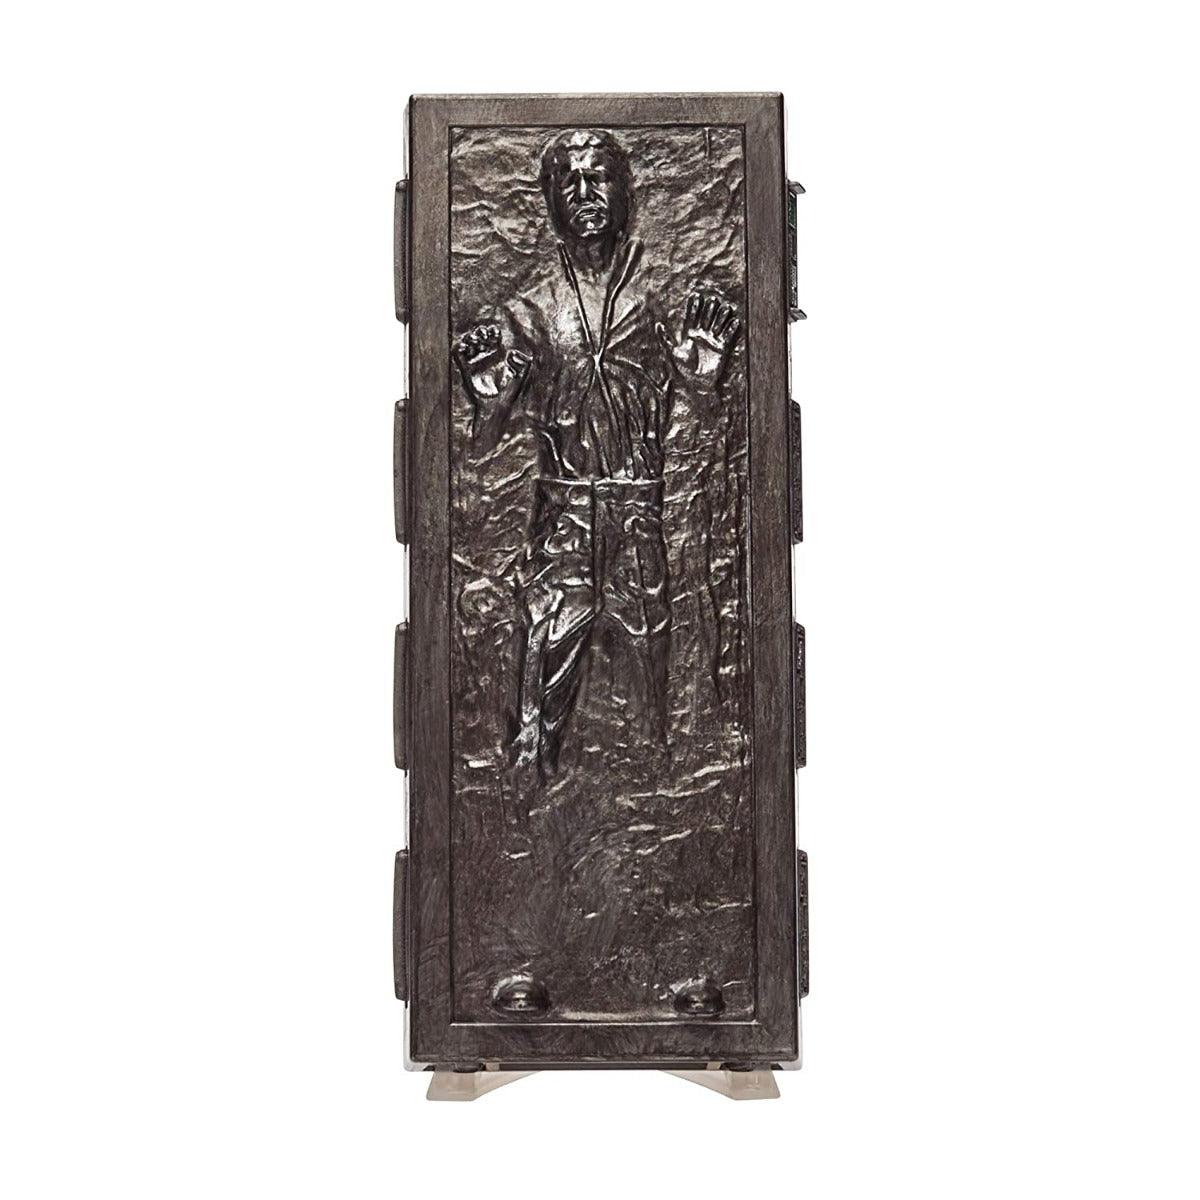 Star Wars The Black Series Han Solo (Carbonite) 6-Inch-Scale: The Empire Strikes Back 40th Anniversary Collectible Figure